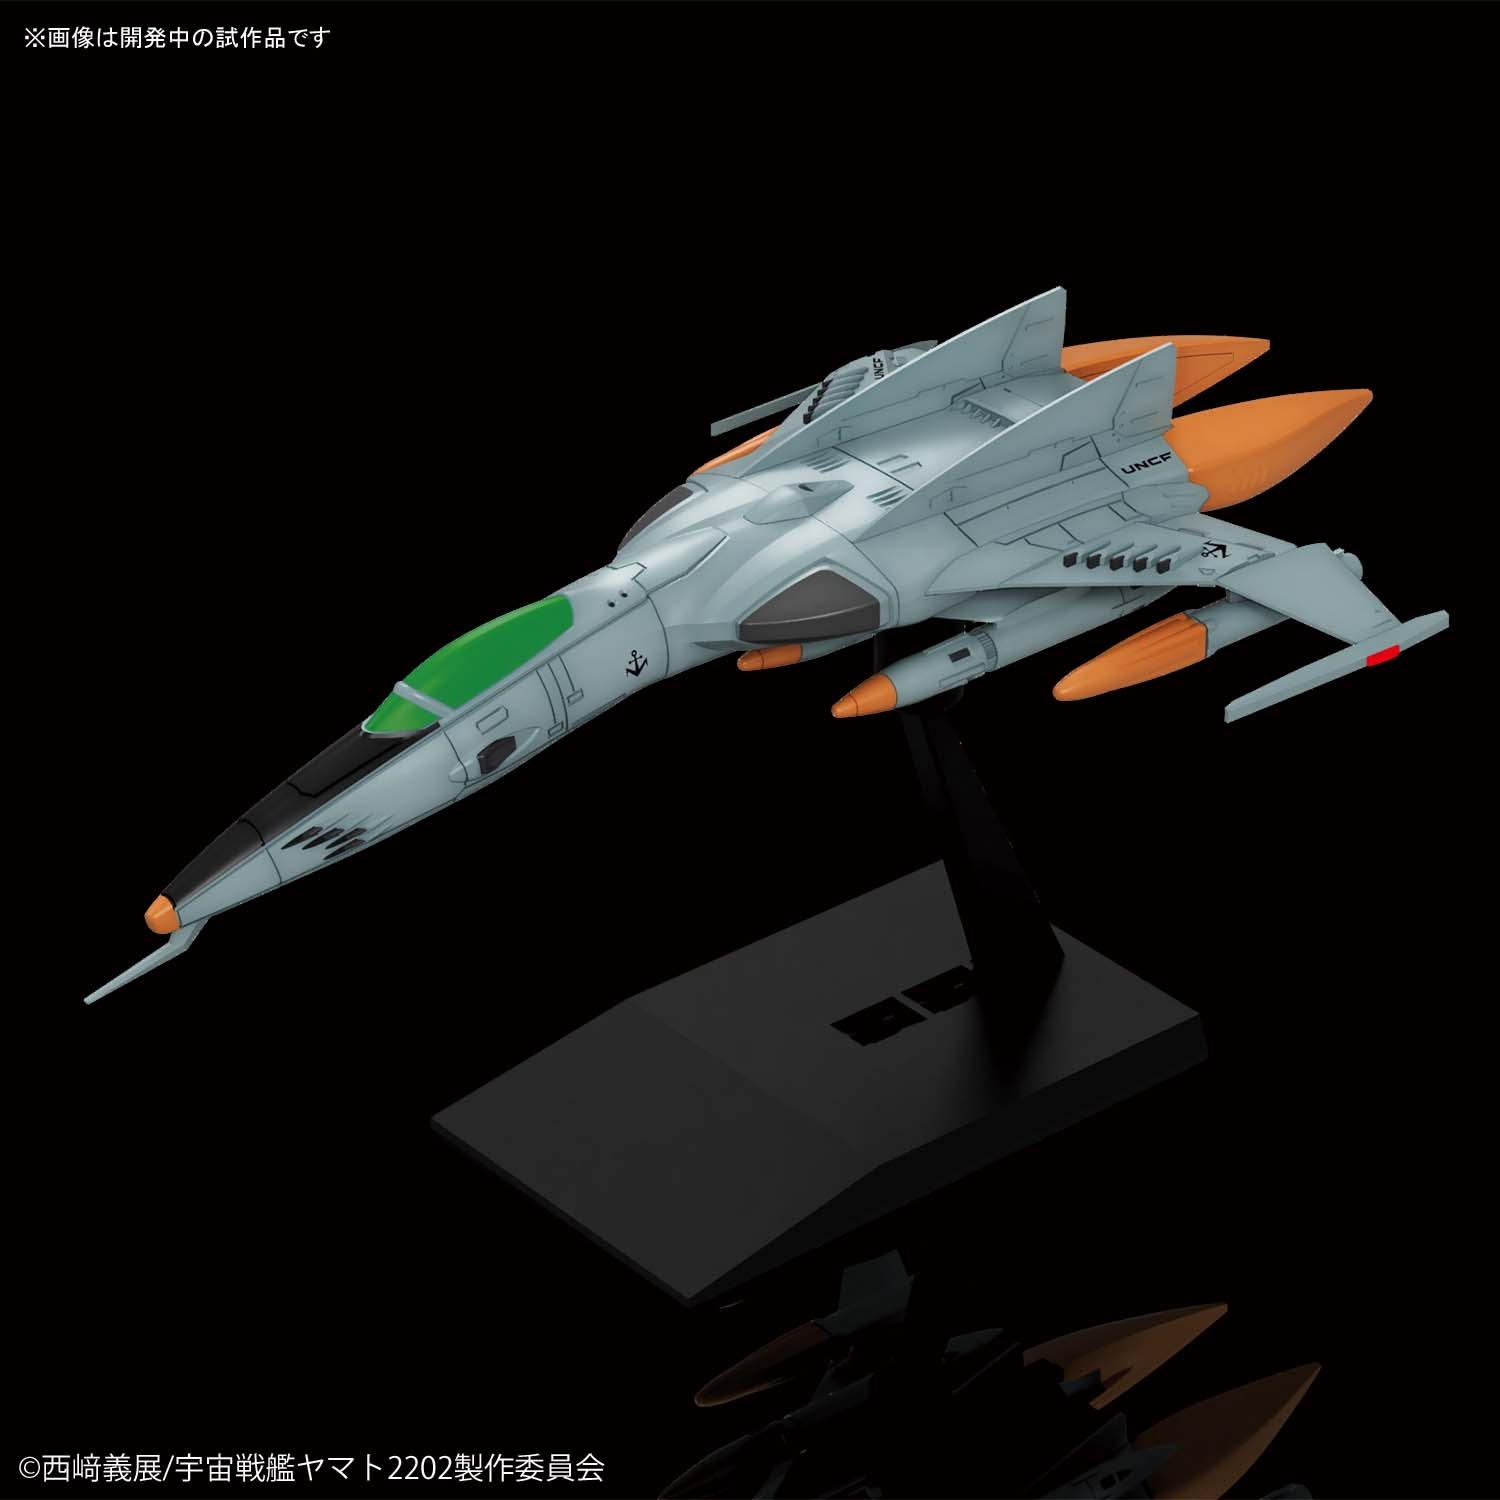 Star Blazers: Space Battleship Yamato 2199 MECHA COLLECTION TYPE 1 SPACE ATTACK FIGHTER COSMO TIGER II SINGLE SEAT